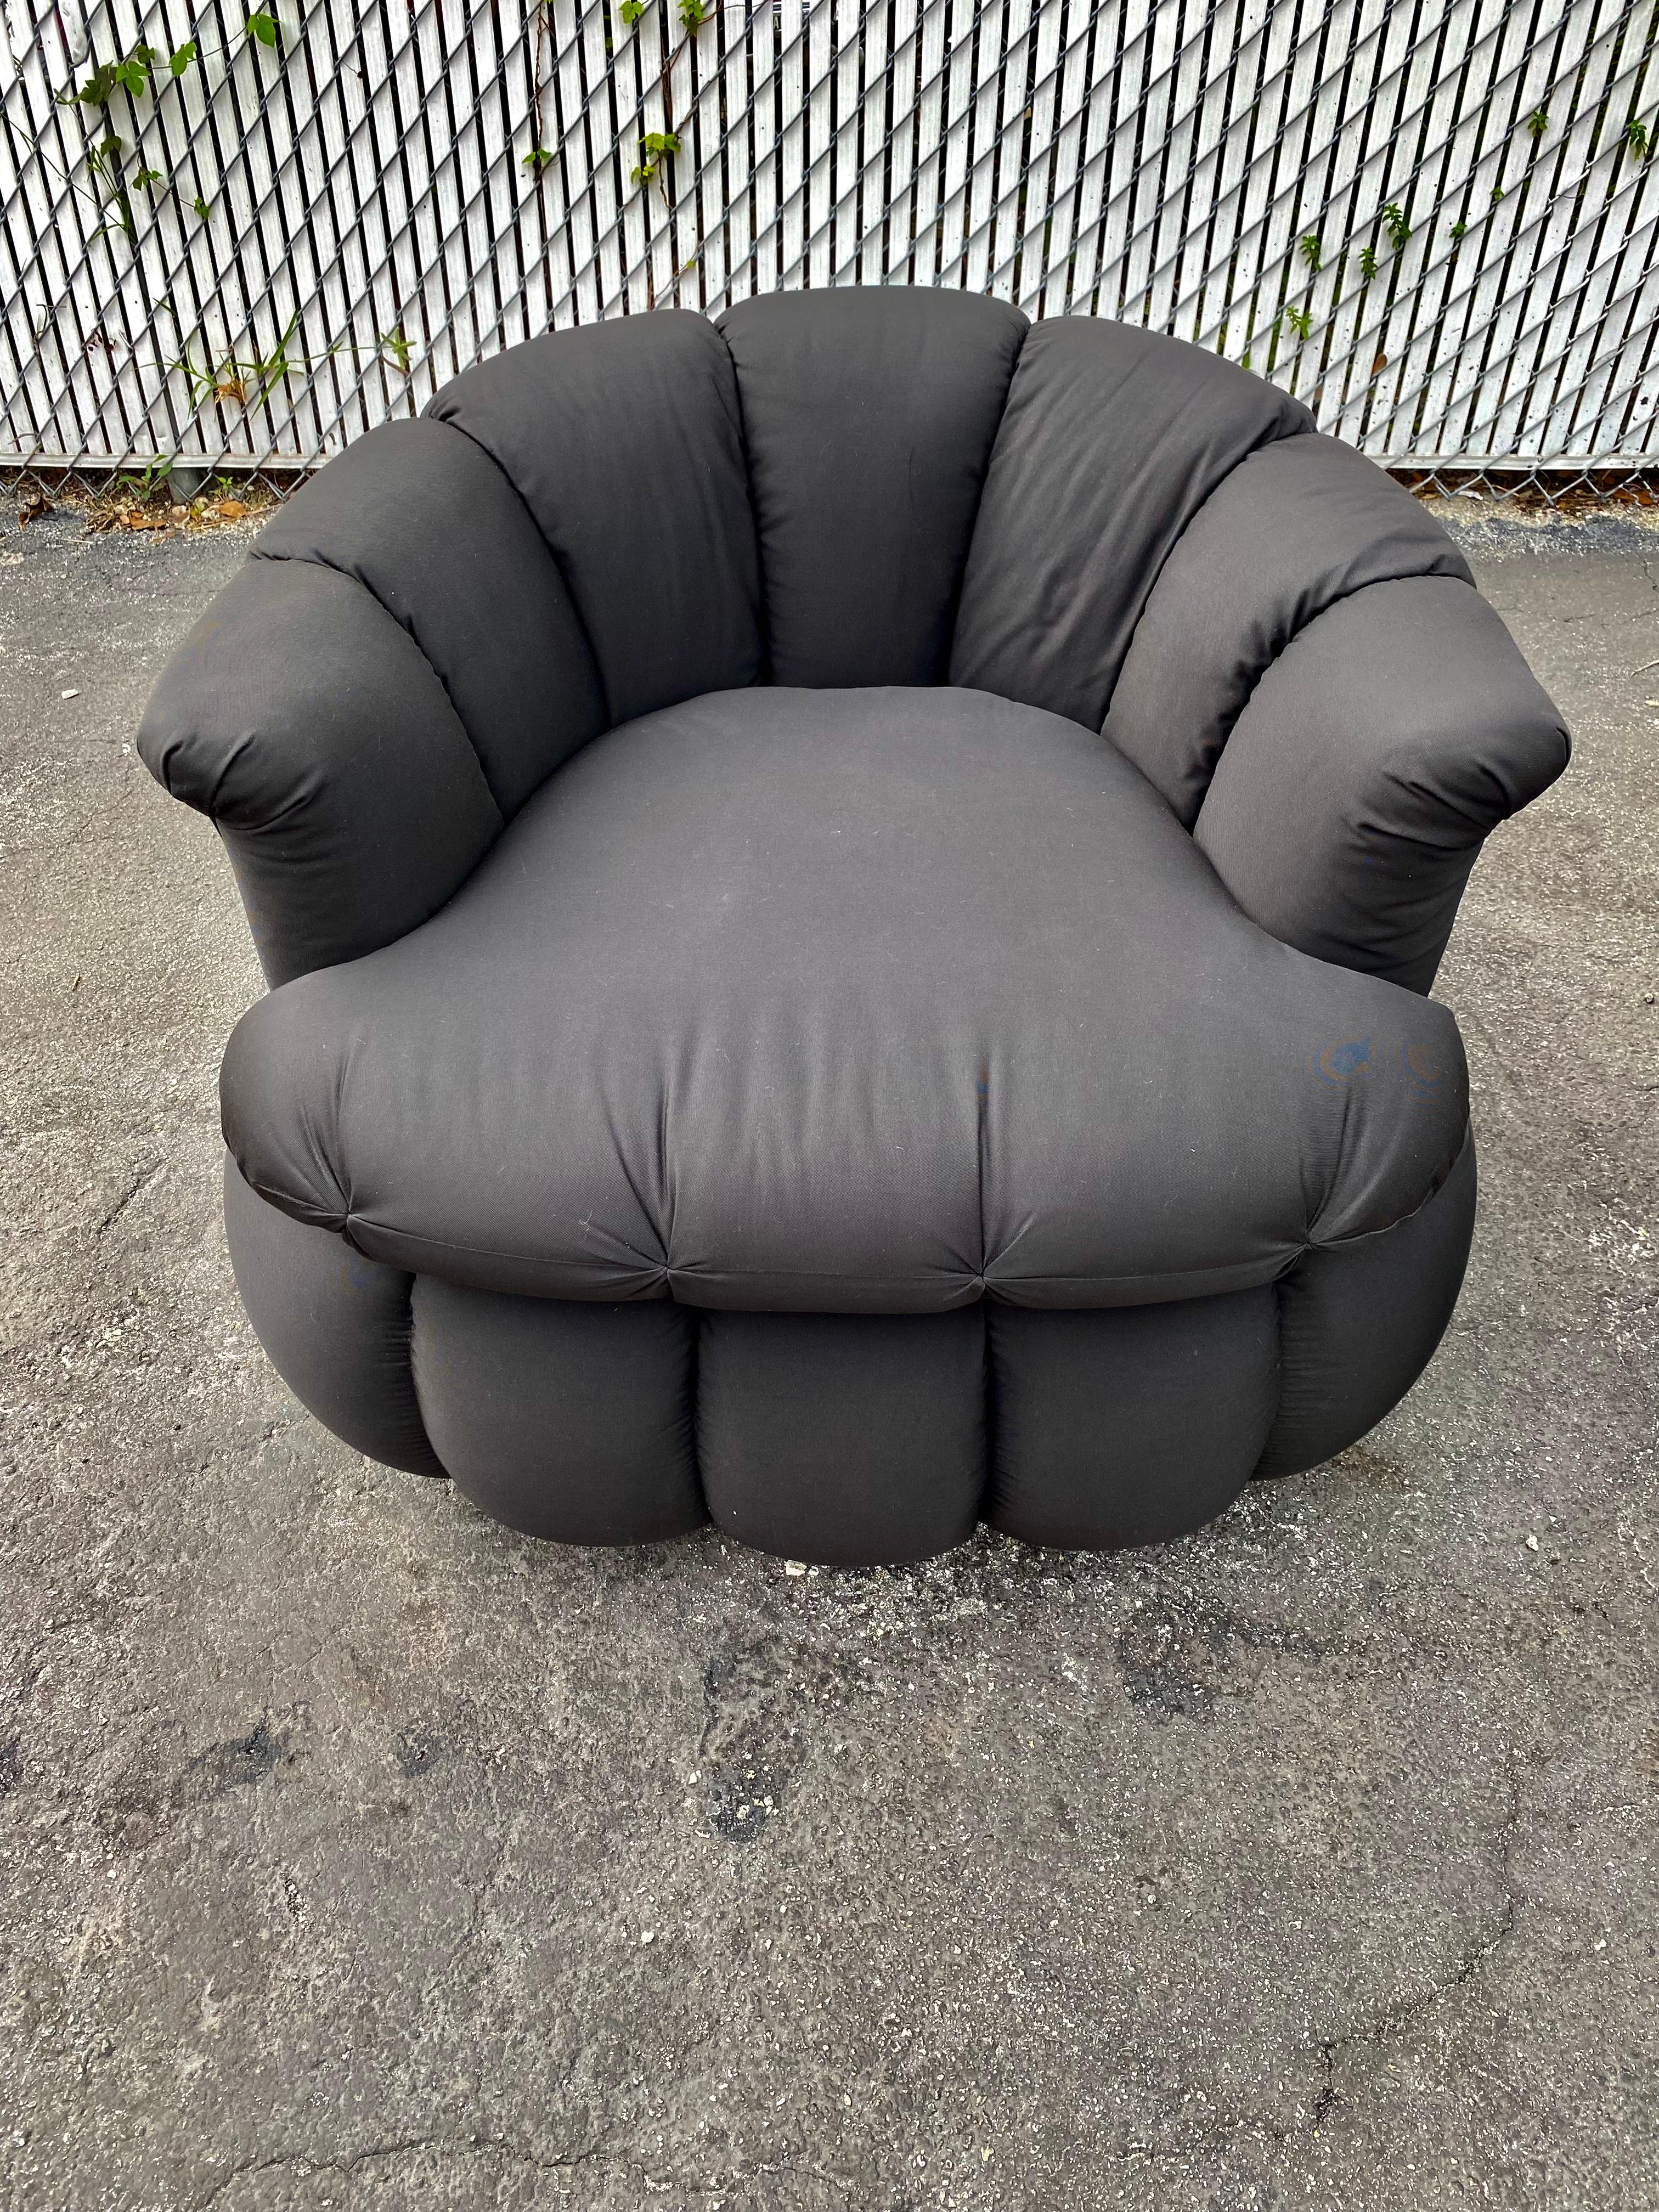 1980s Croissant Tufted Channeled Swivel Chairs, Set of 2 For Sale 2